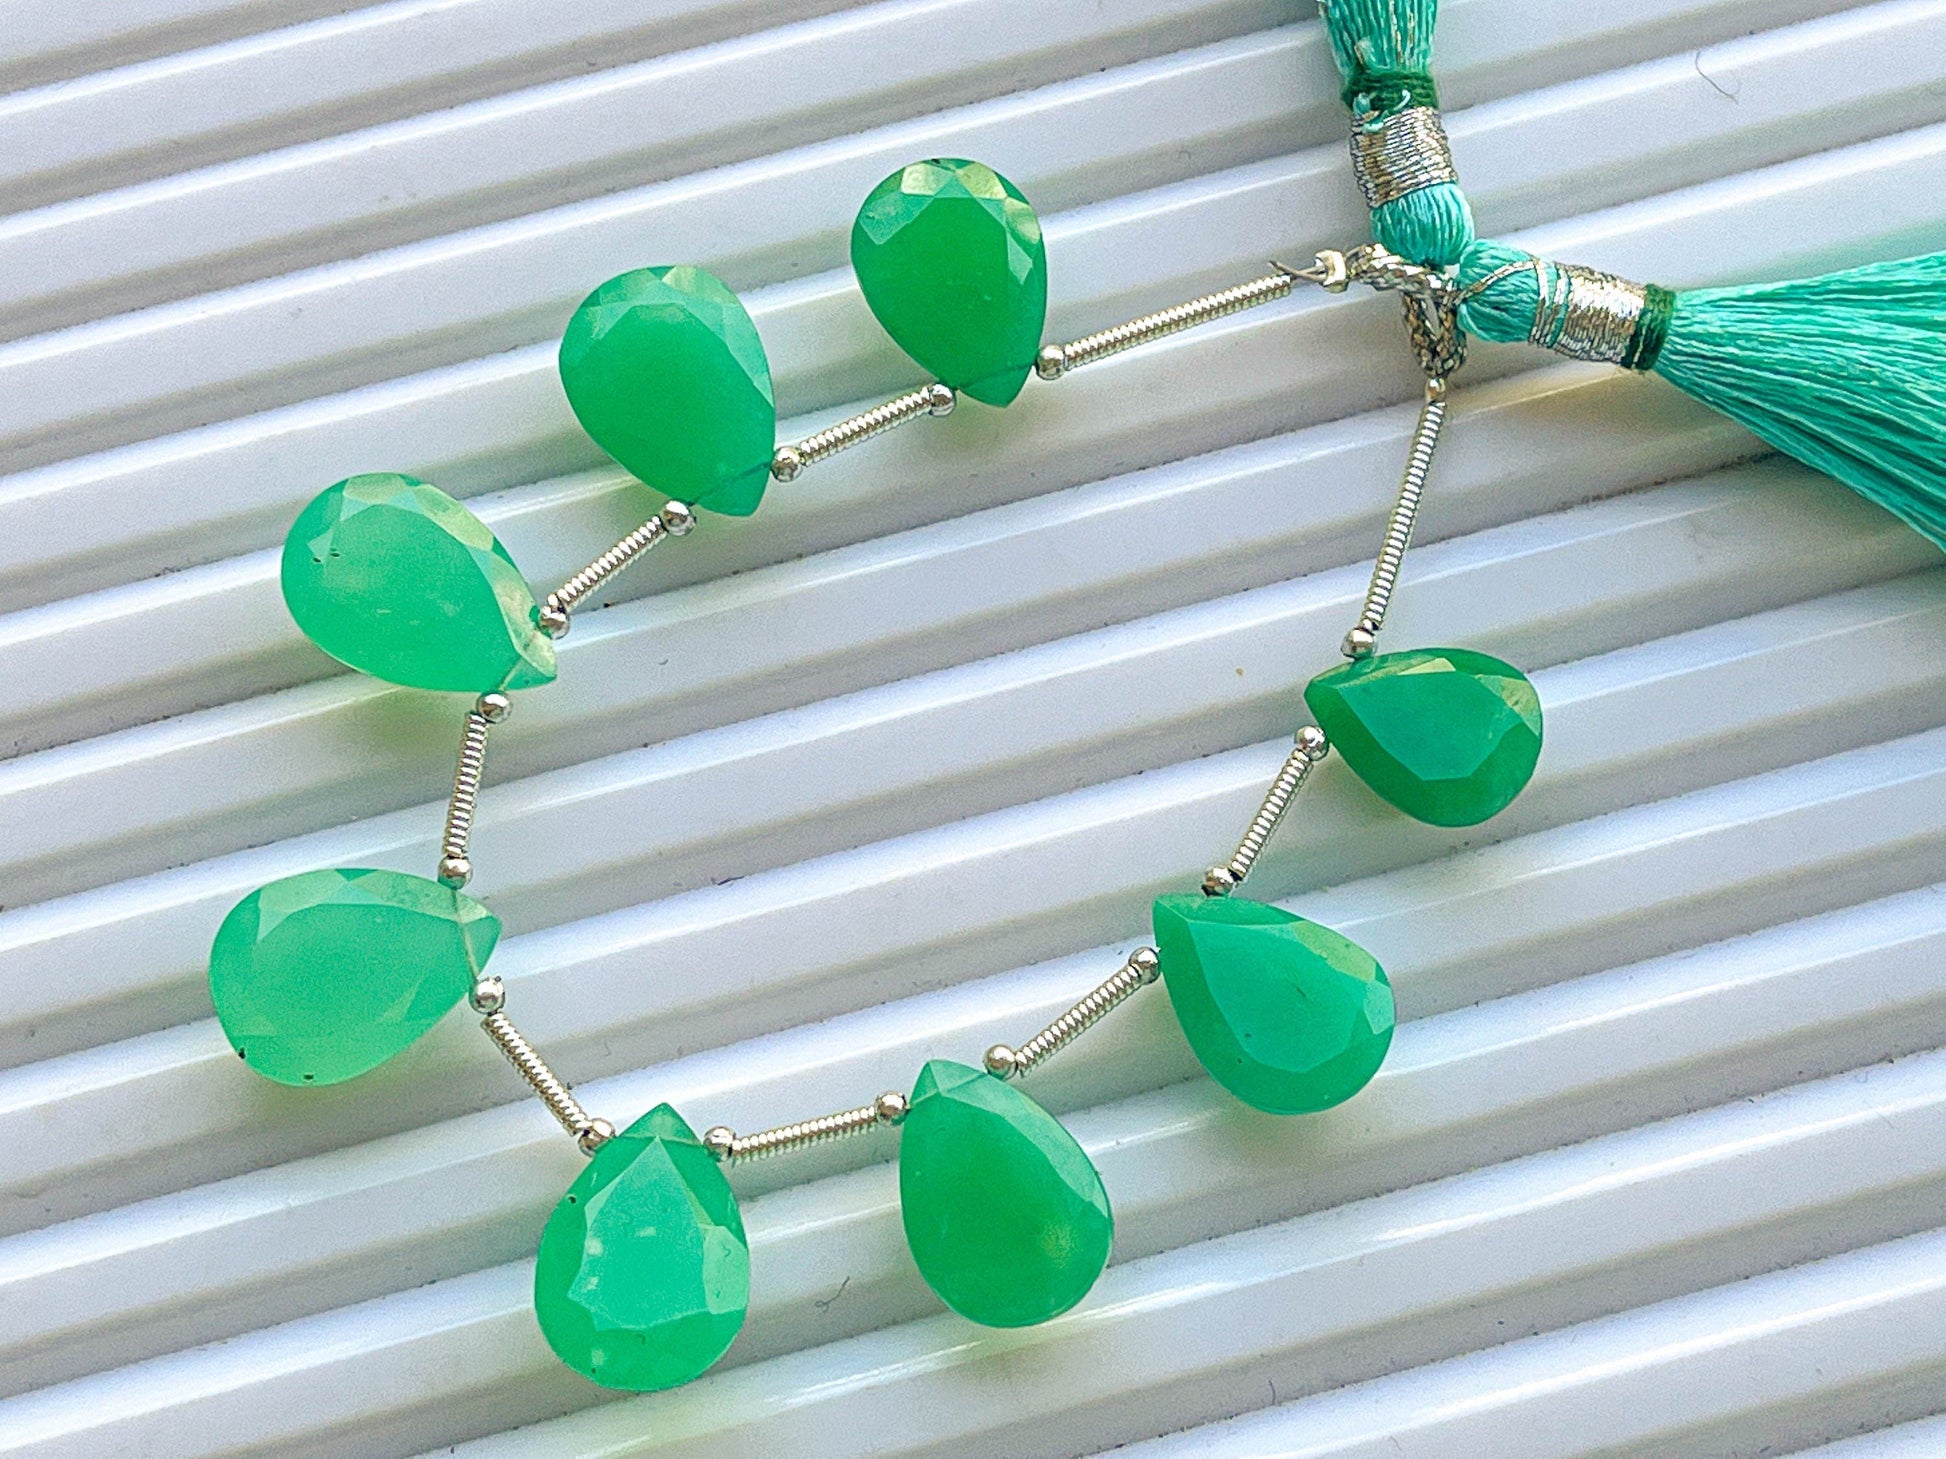 8 Pieces AAA Australian Chrysoprase Pear Shape Cut Stone Beads, Natural Chrysoprase Gemstone, Chrysoprase Briolette Beads,10x13mm to 10x15mm Beadsforyourjewelry